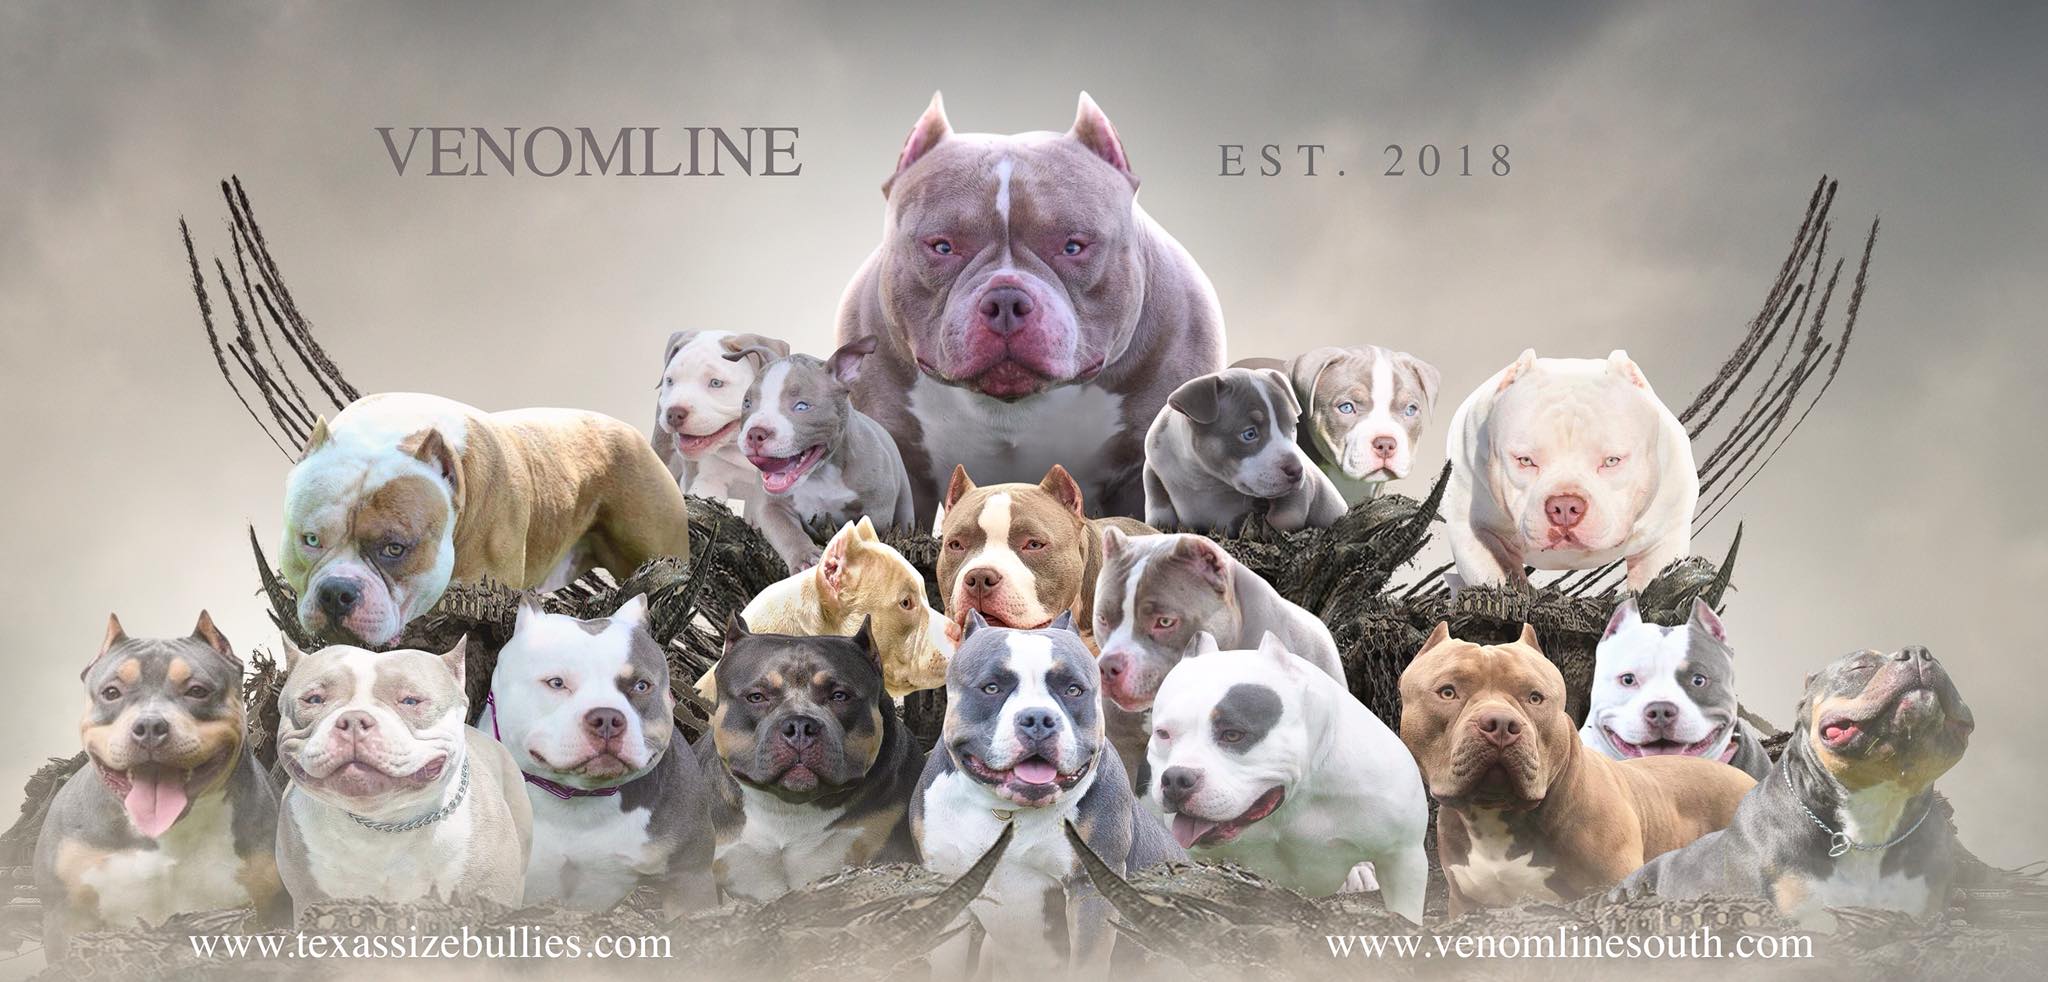 American Bully Bloodline Chart